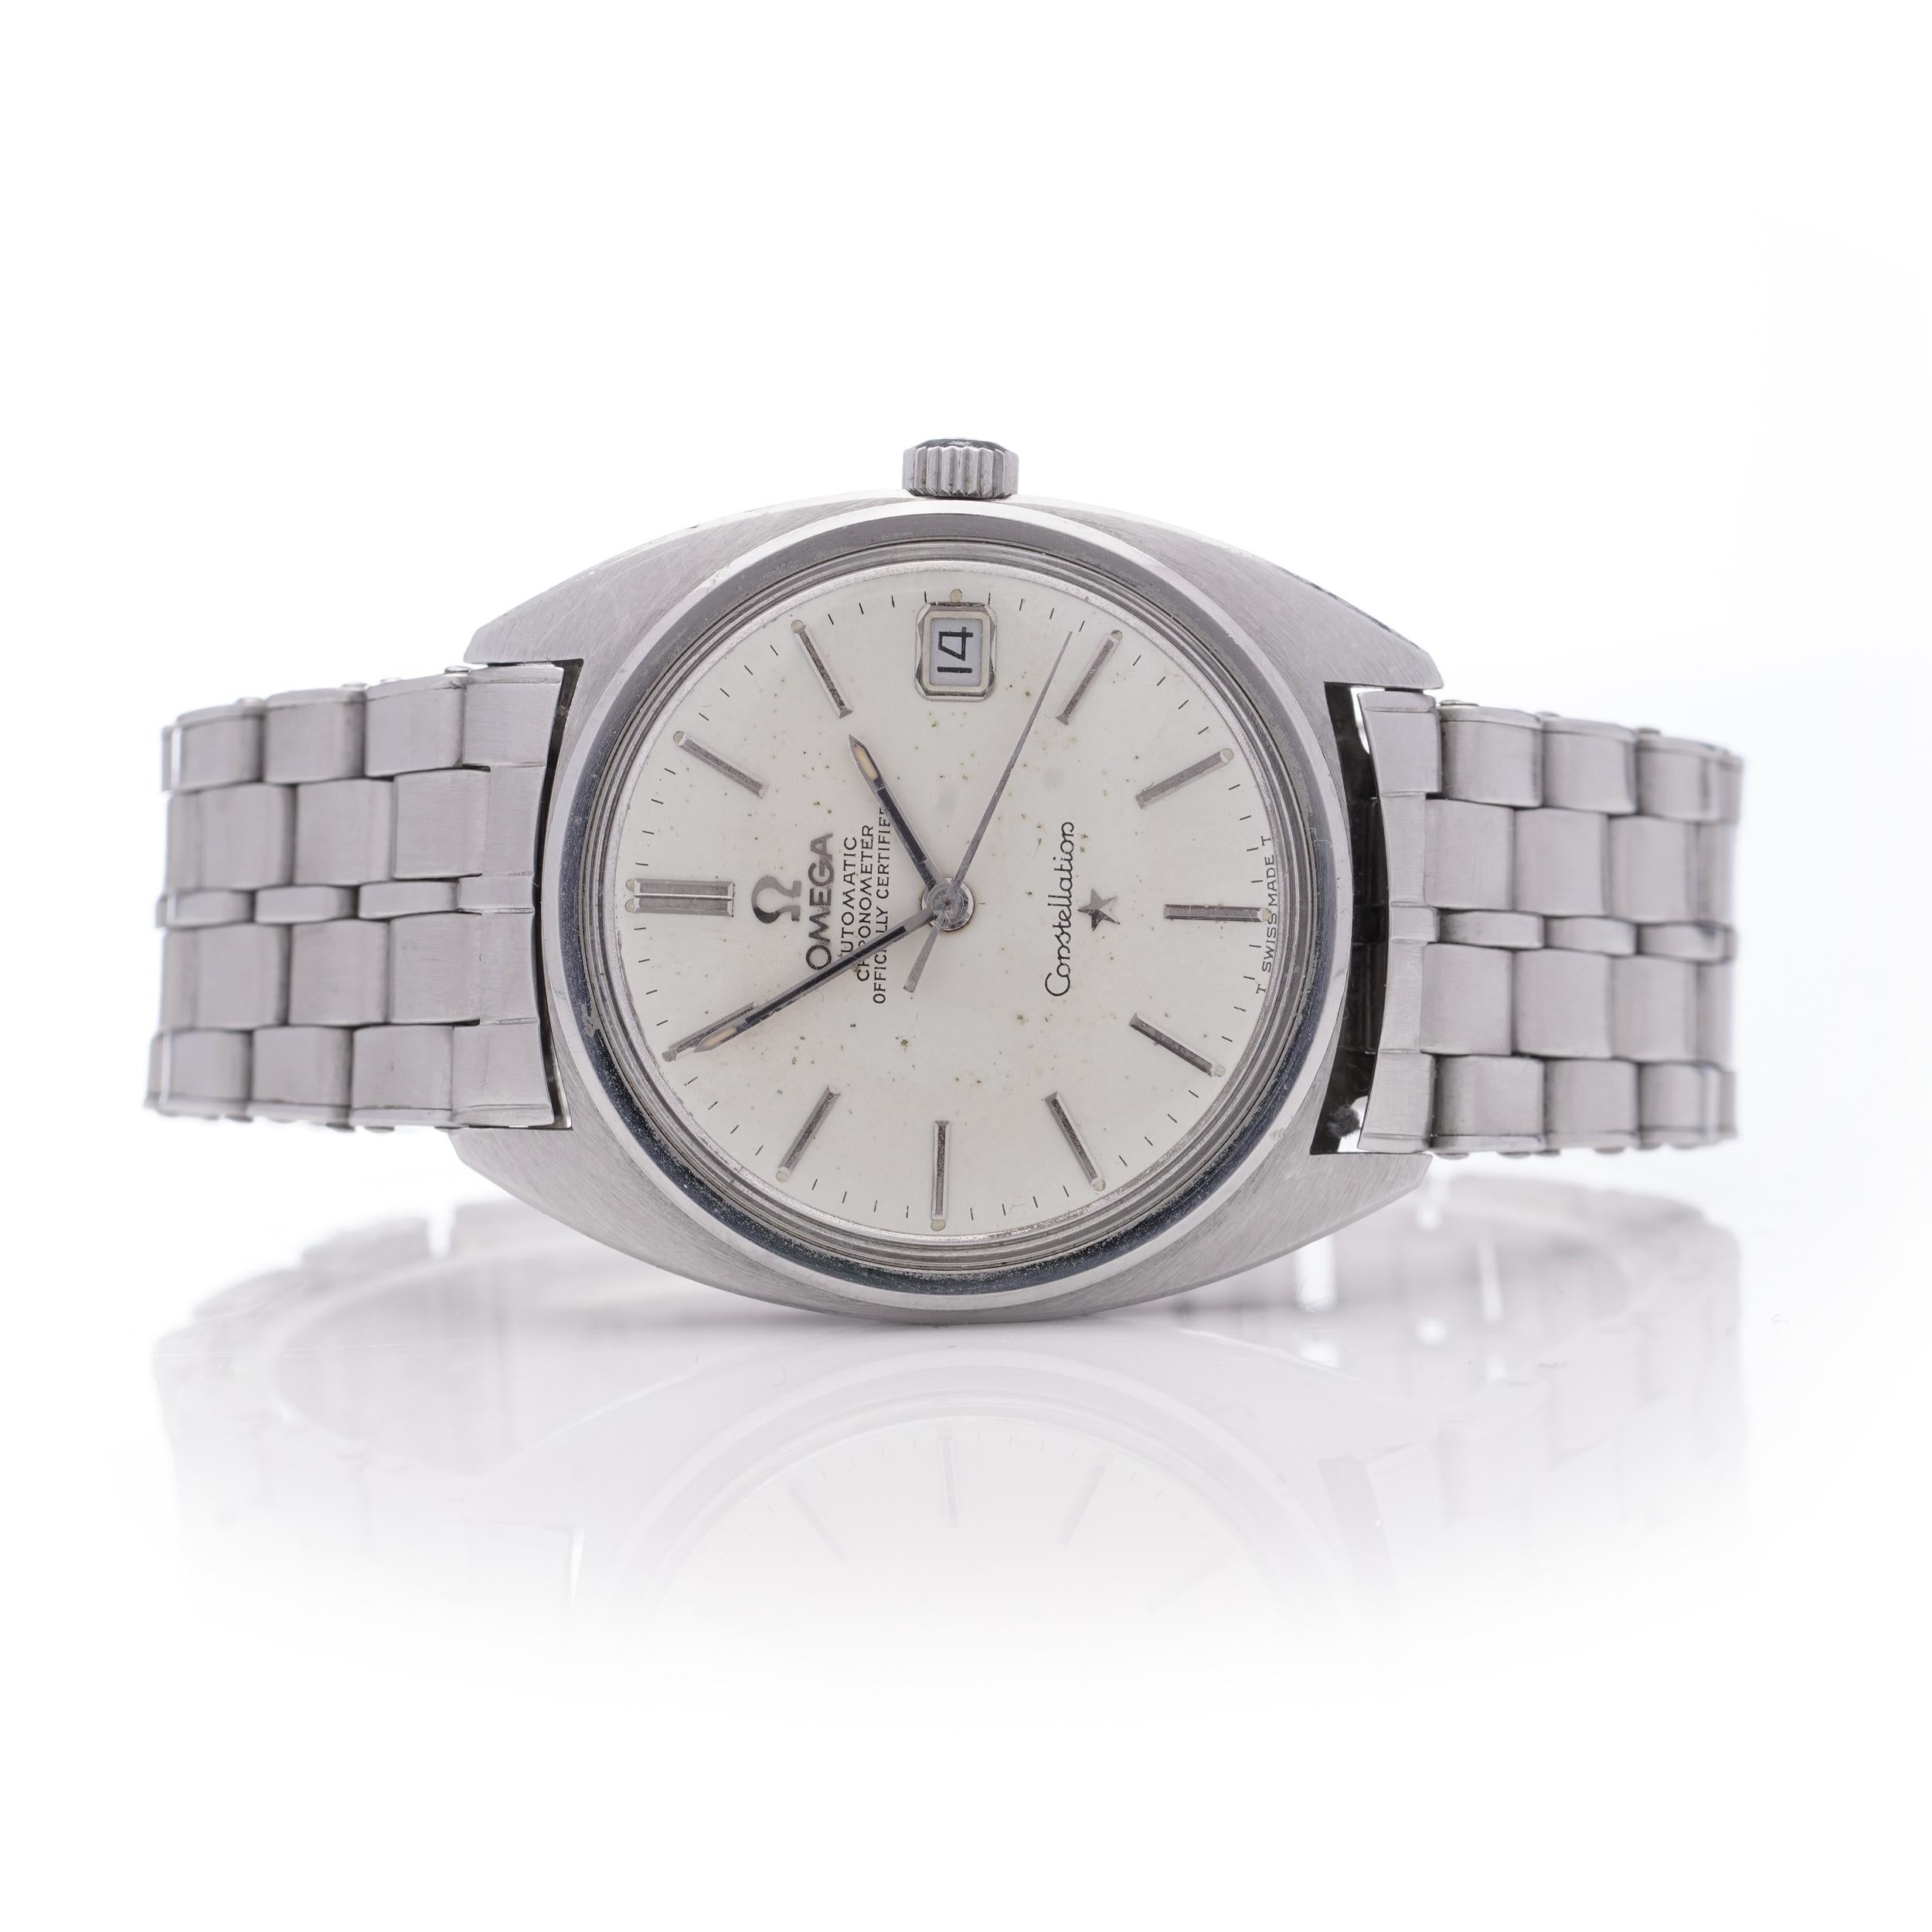 Omega Constellation Chronometer Automatic Vintage Stainless Steel Watch In Good Condition For Sale In Braintree, GB